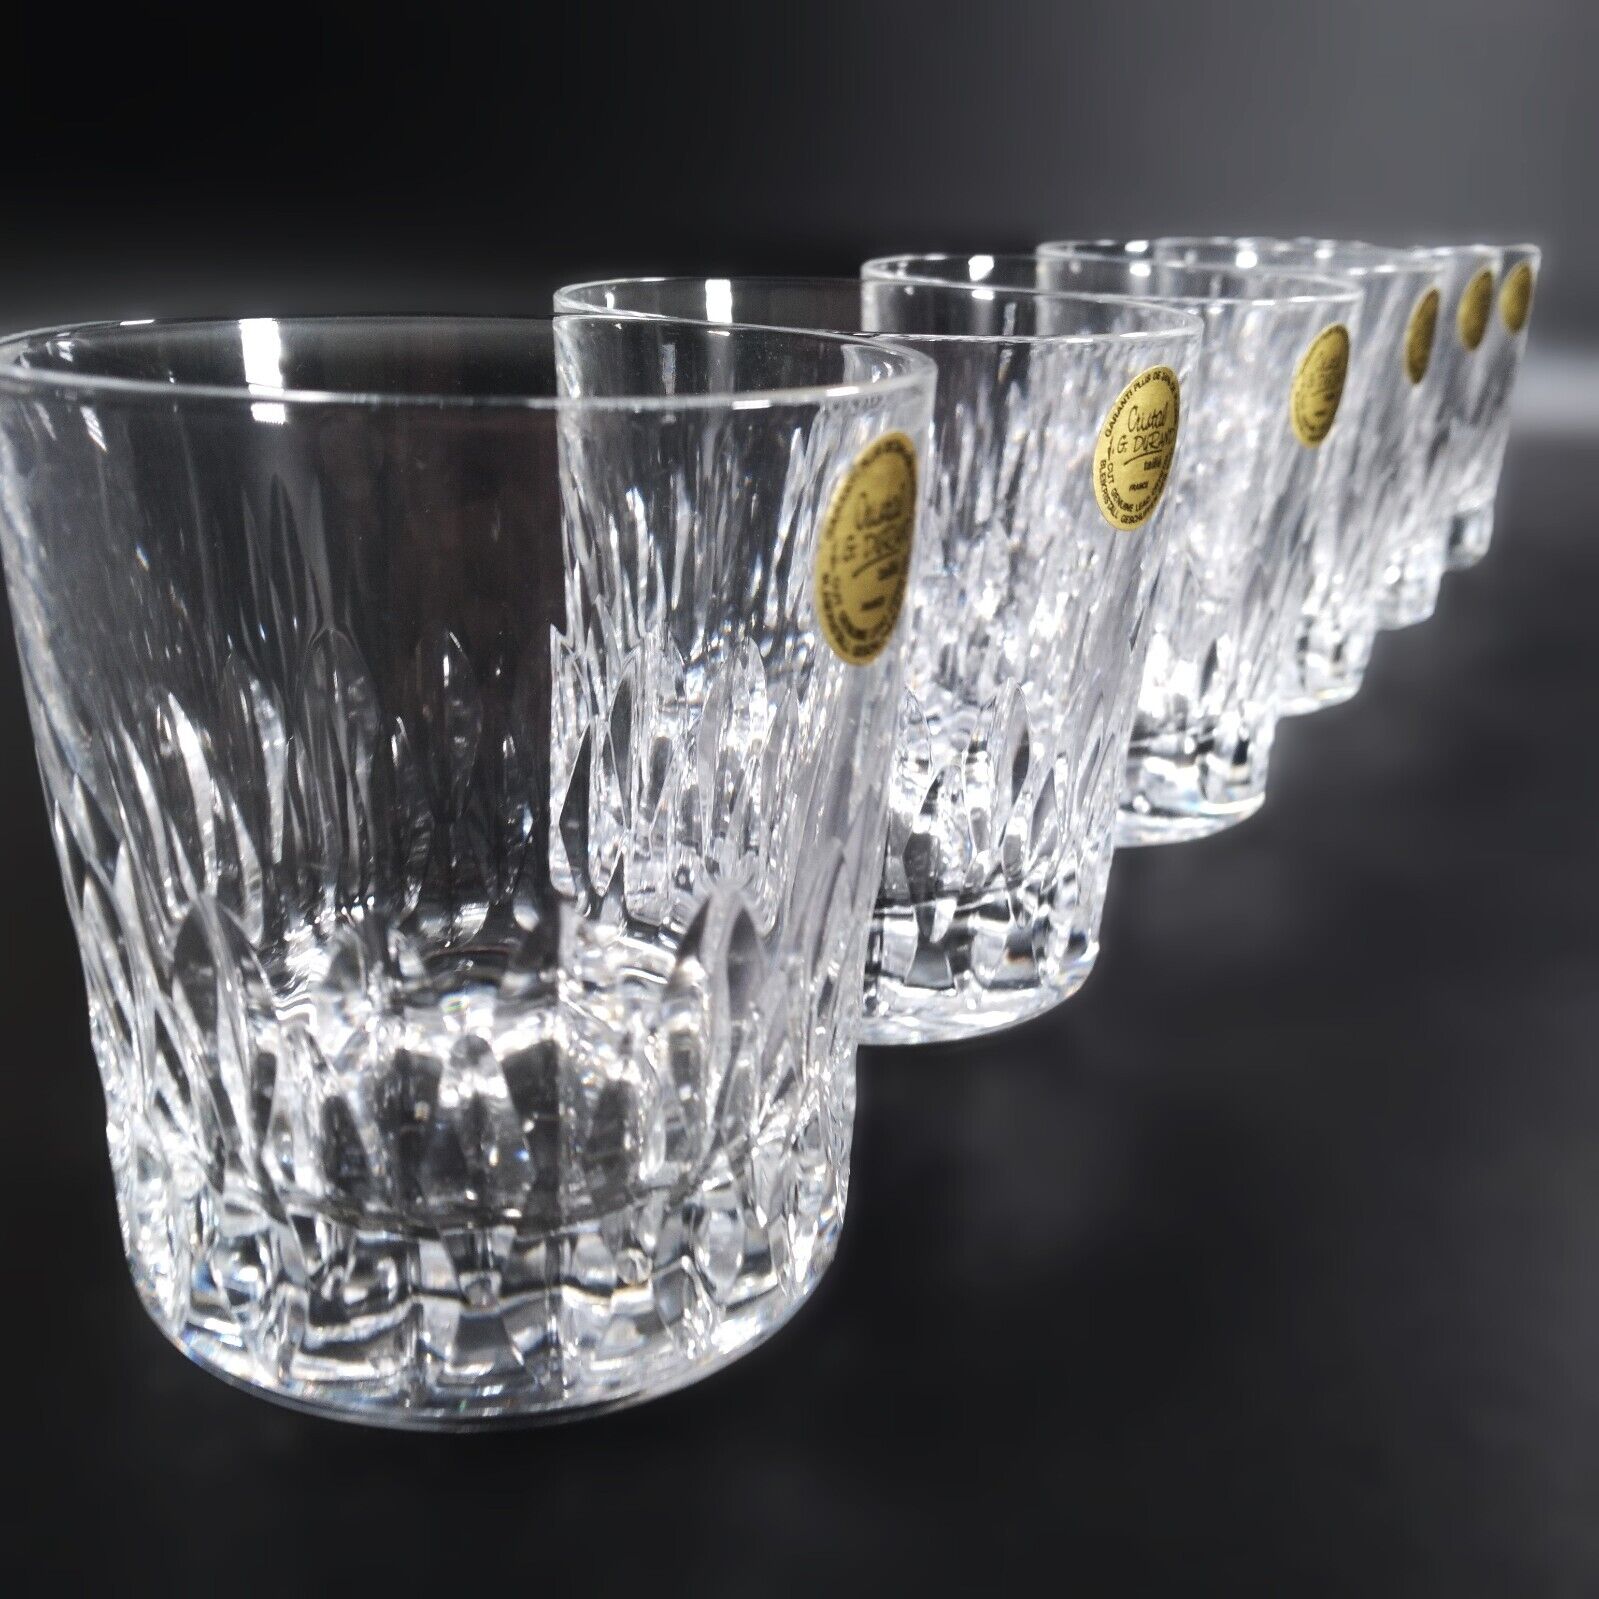 NEW 6 Pc J.G. Durand JUAN Crystal Old Fashioned Glasses Clear Whiskey Tumblers